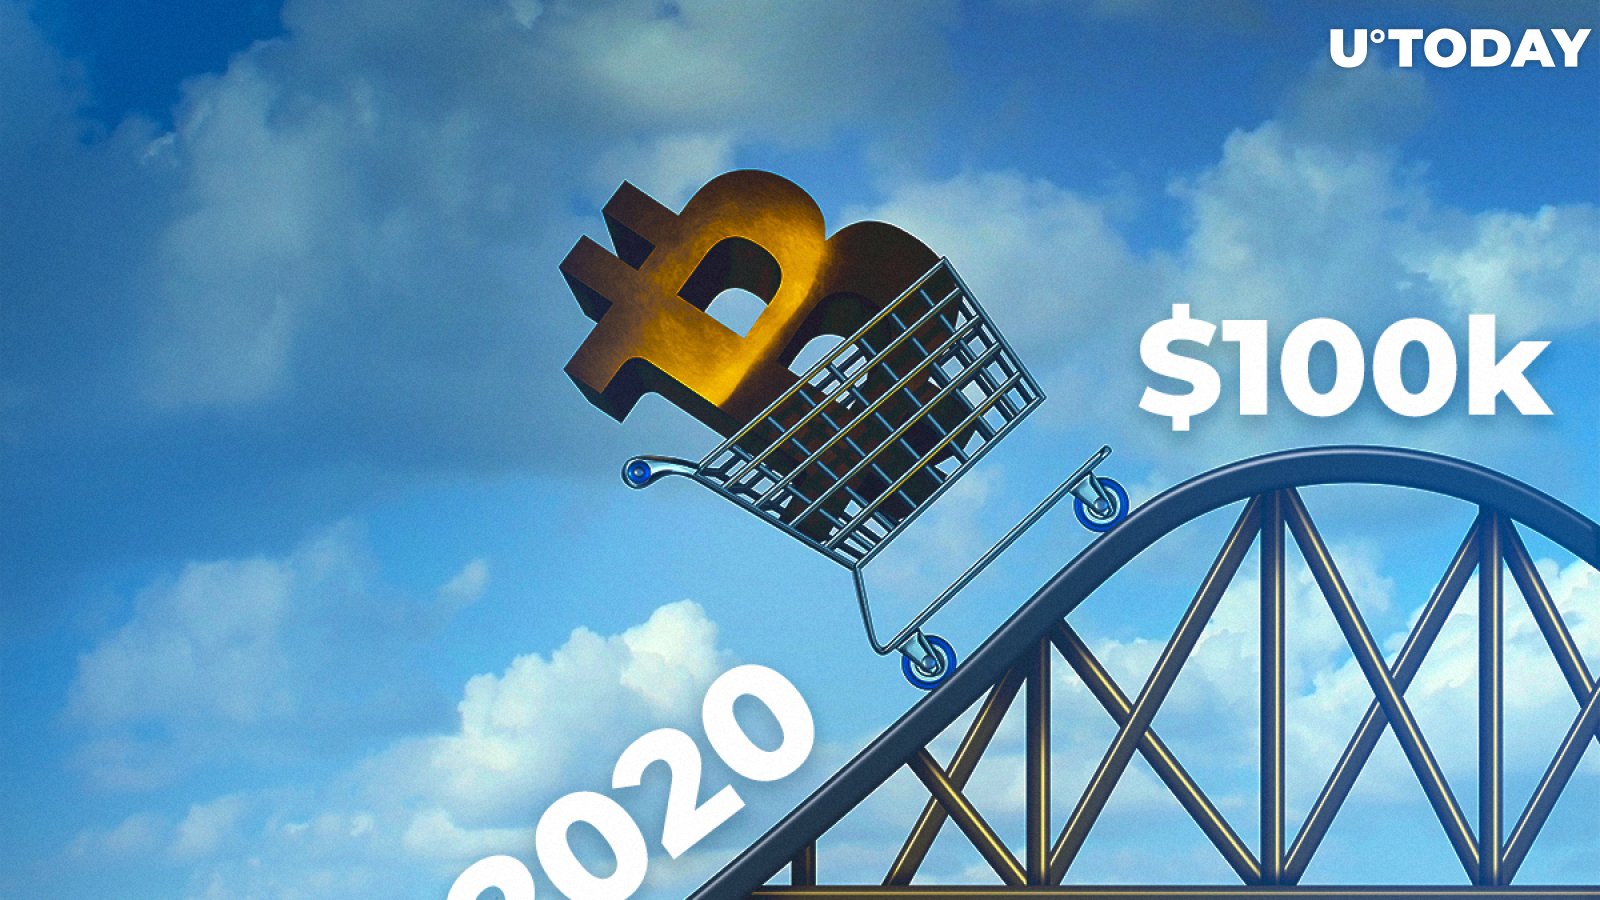 Bitcoin Price Prediction Is $100k After 2020 Halving, but What About the $6,000 Hot Target?